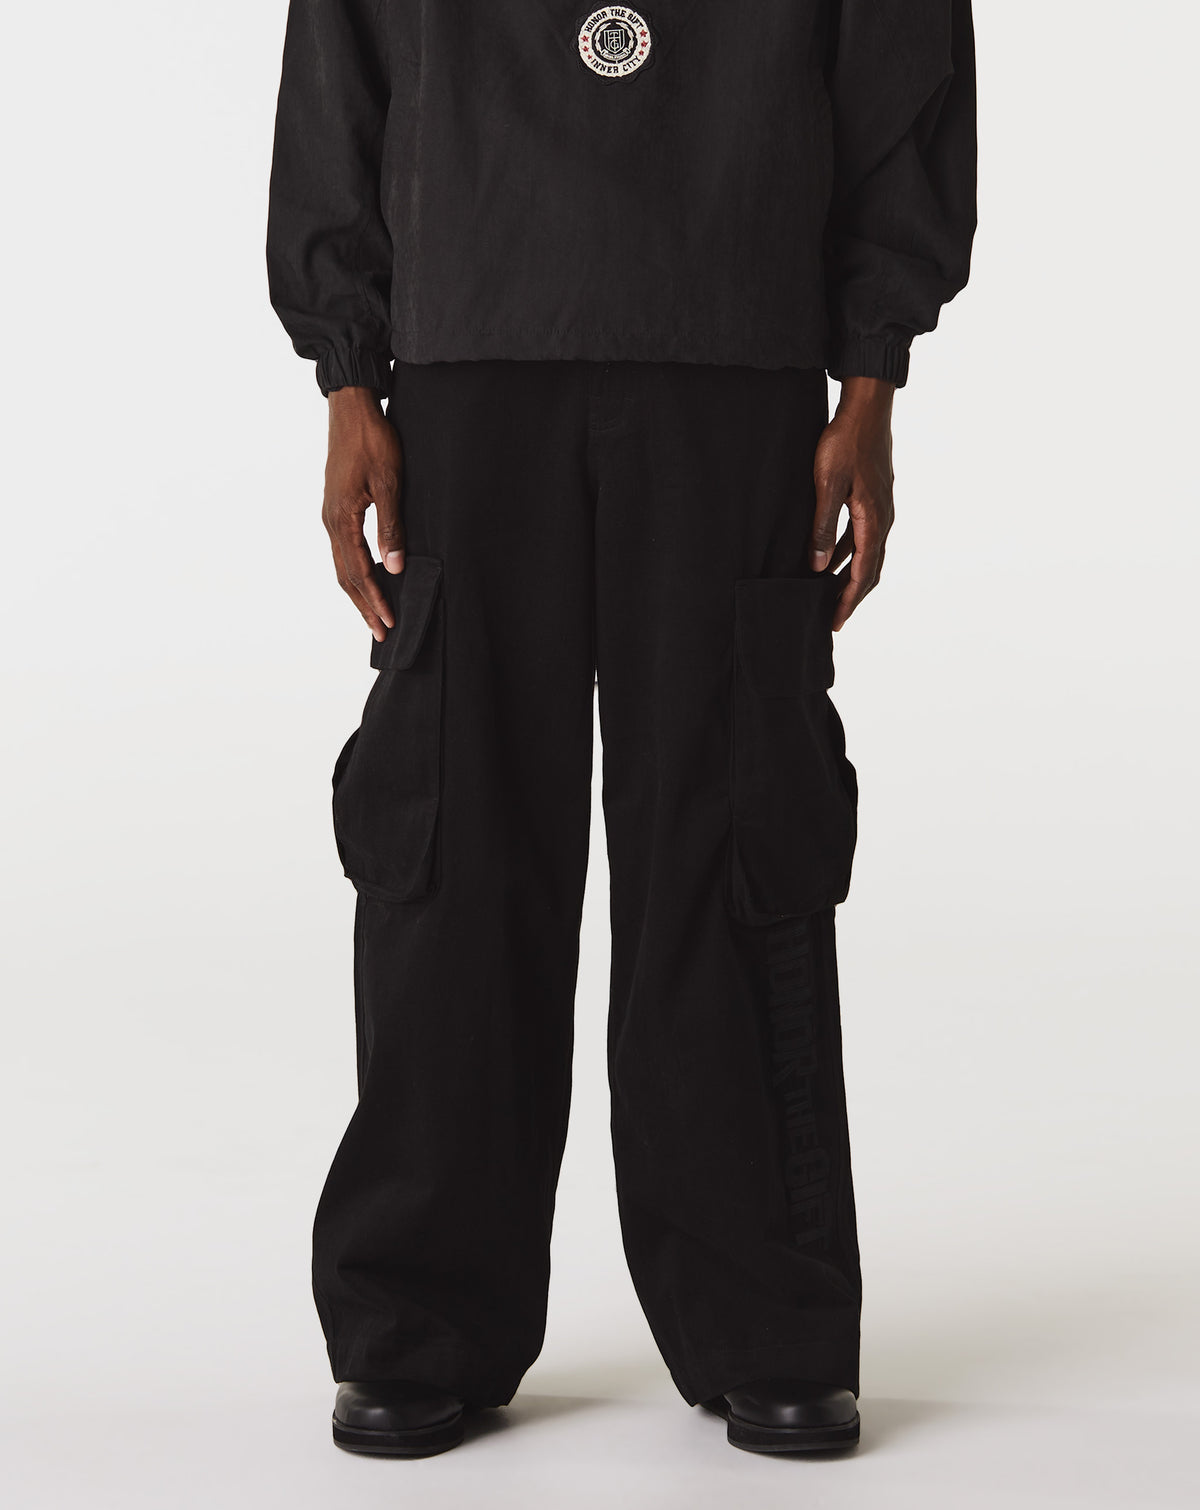 Honor The Gift Wide Leg Cargo Pants - Rule of Next Apparel